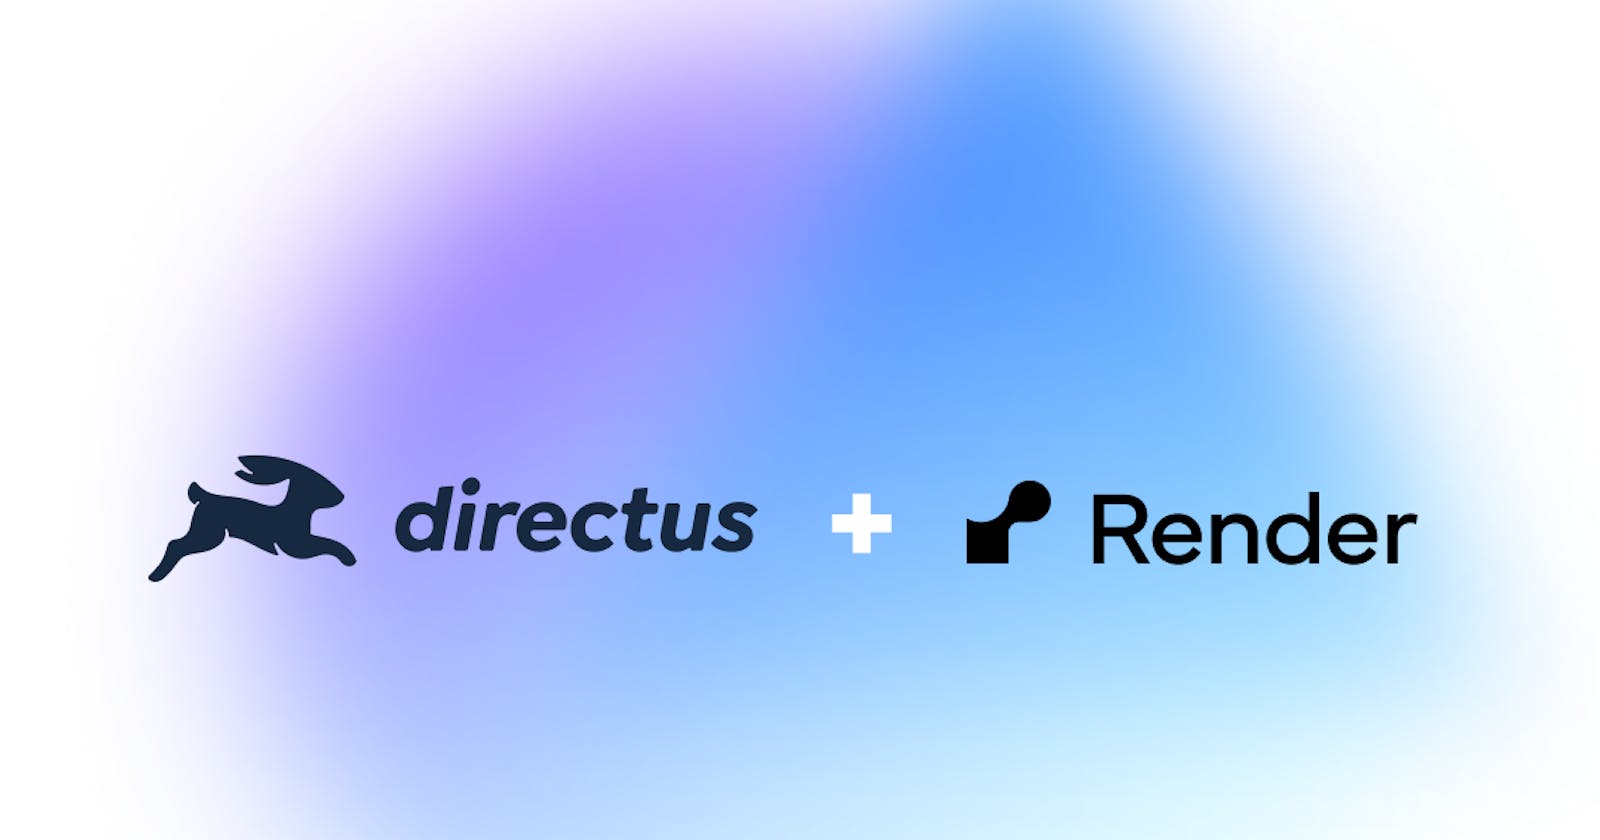 How to Deploy Directus to Render.com